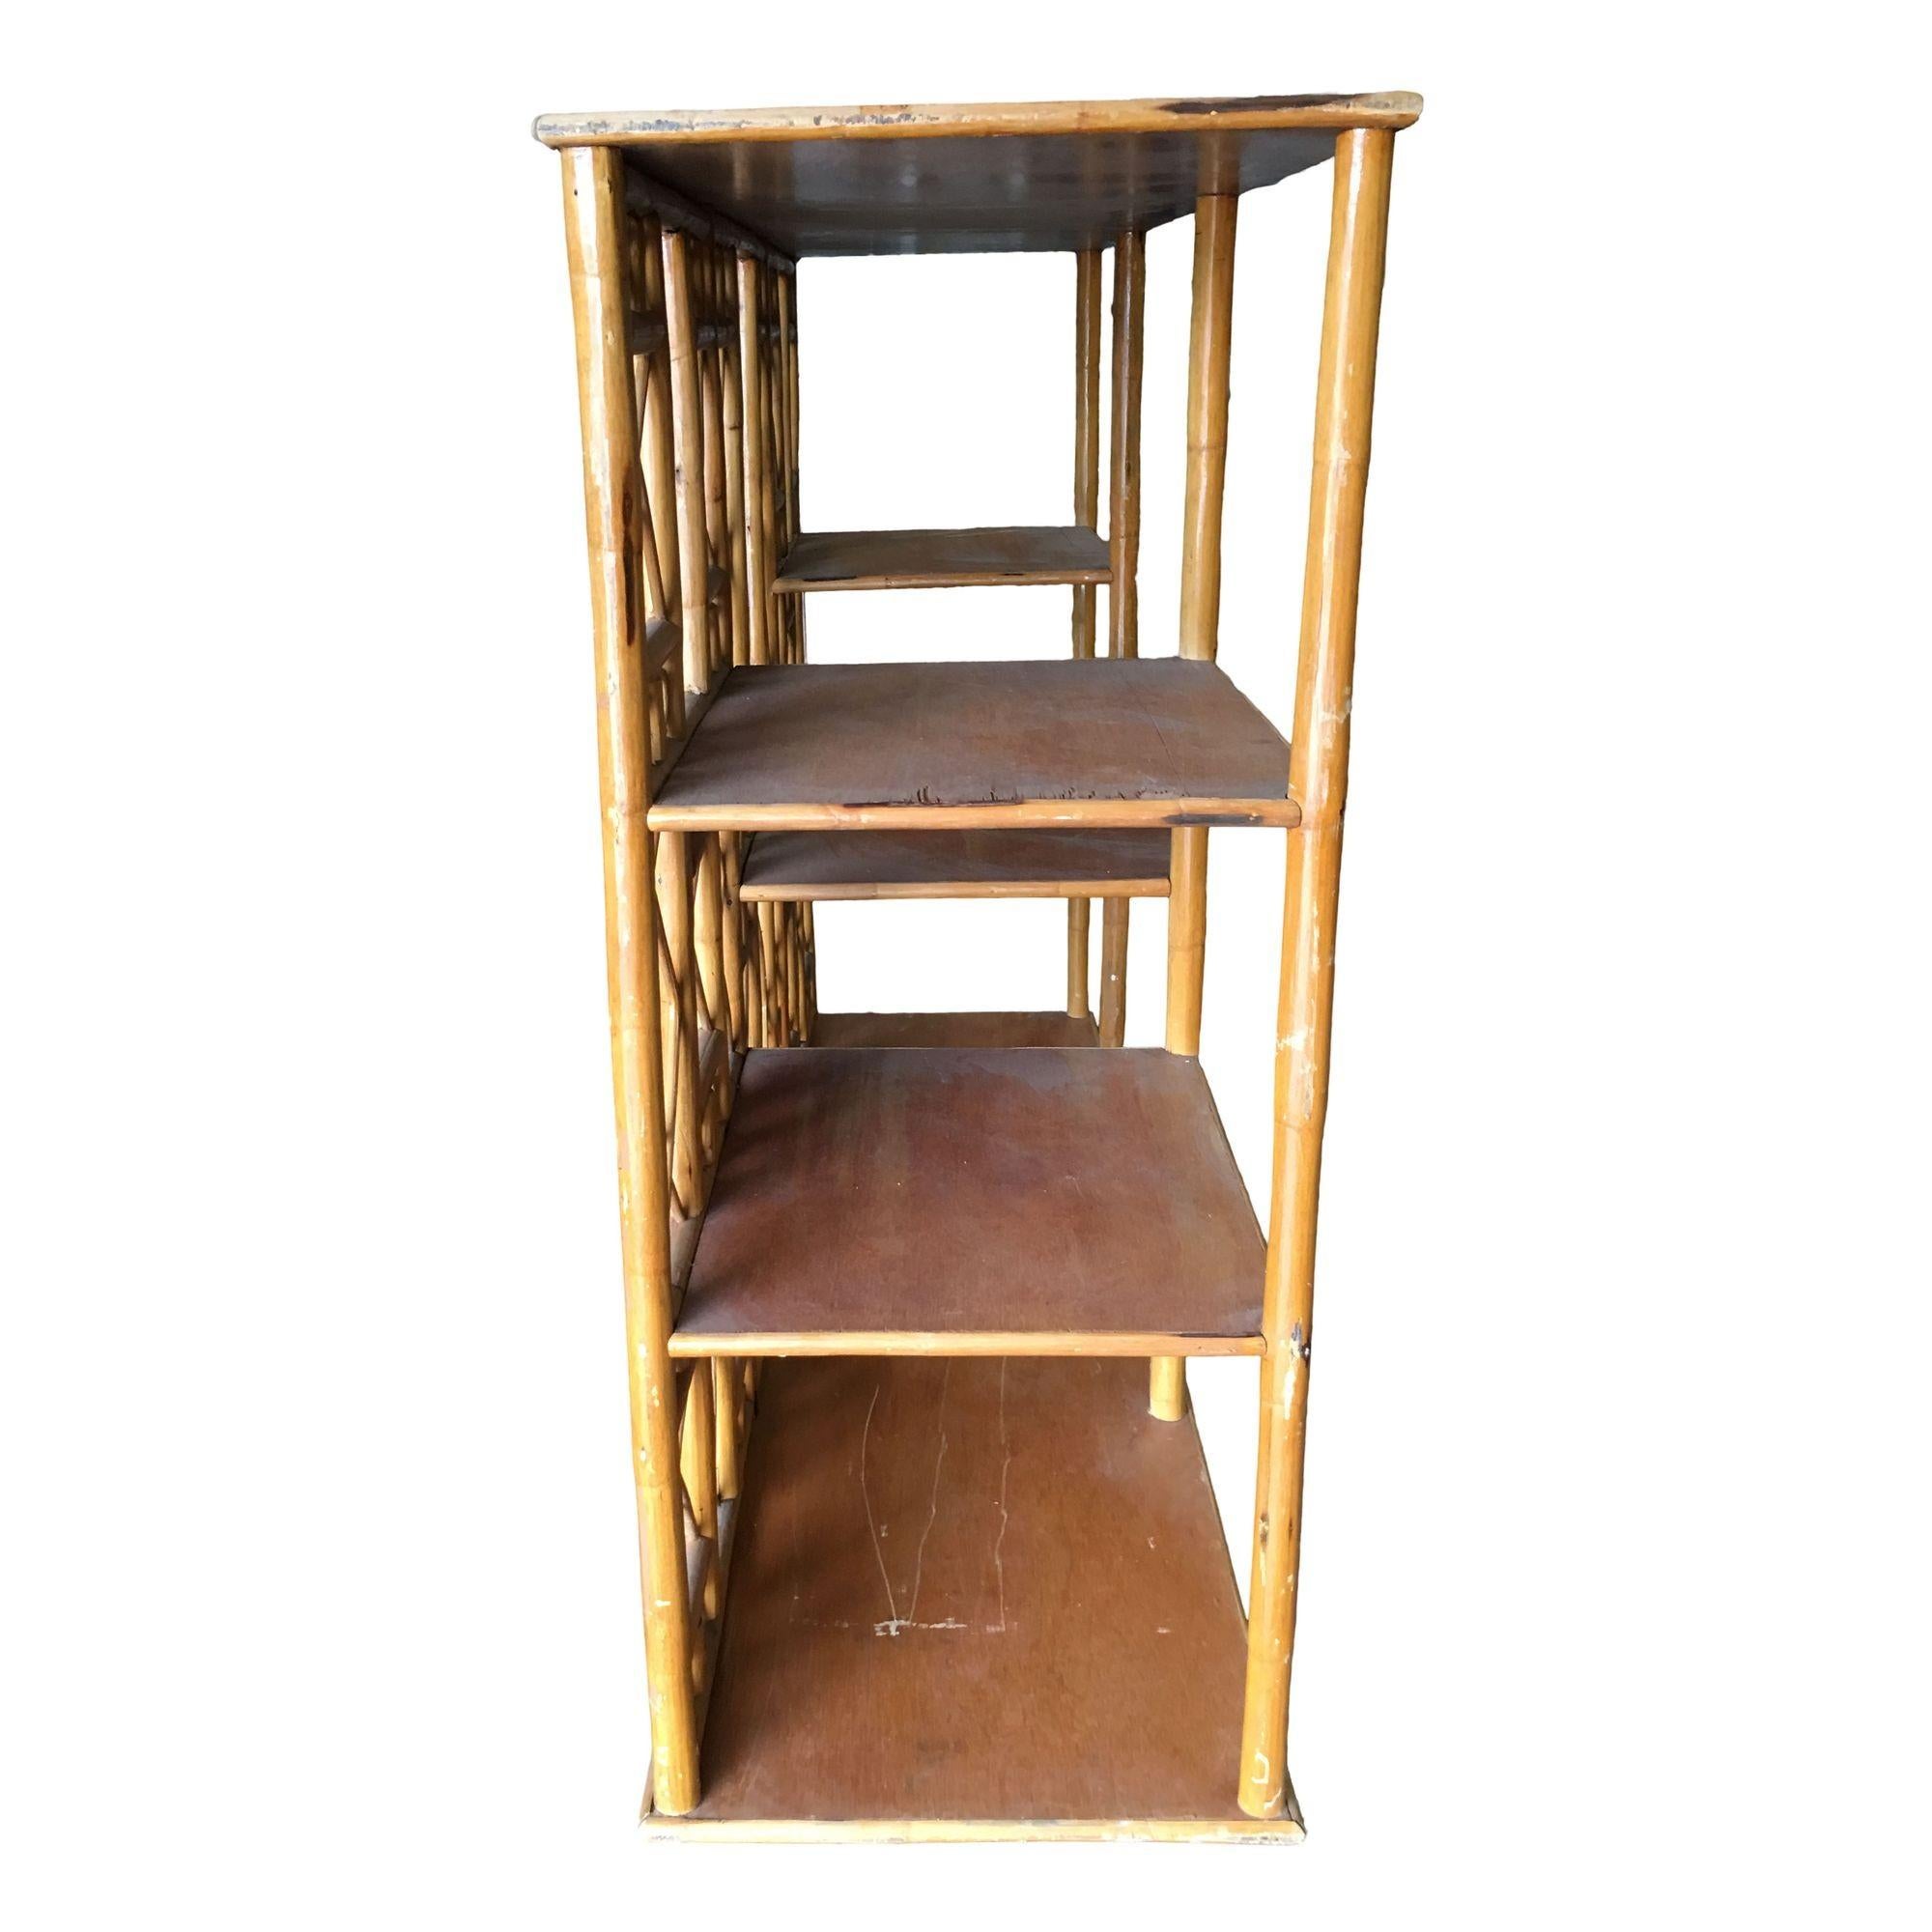 Mid-20th Century Restored Rattan Seven-Tier Tic-Tac-Toe Display Shelf Wall Etagere Unit For Sale